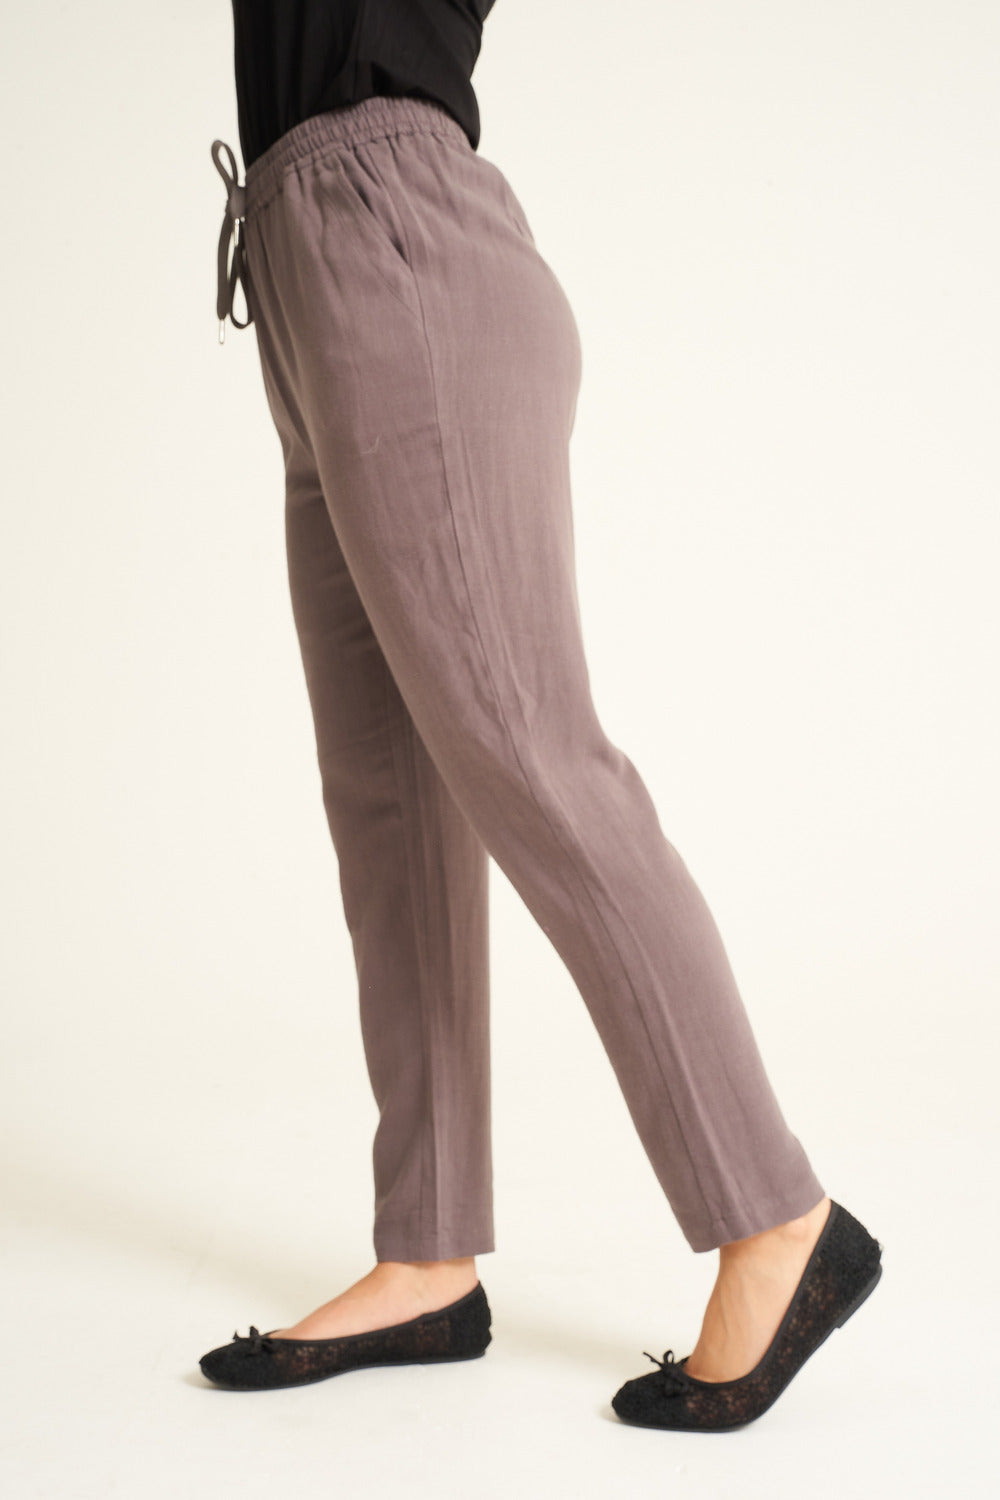 Saloos Cotton Trousers with Side Pockets